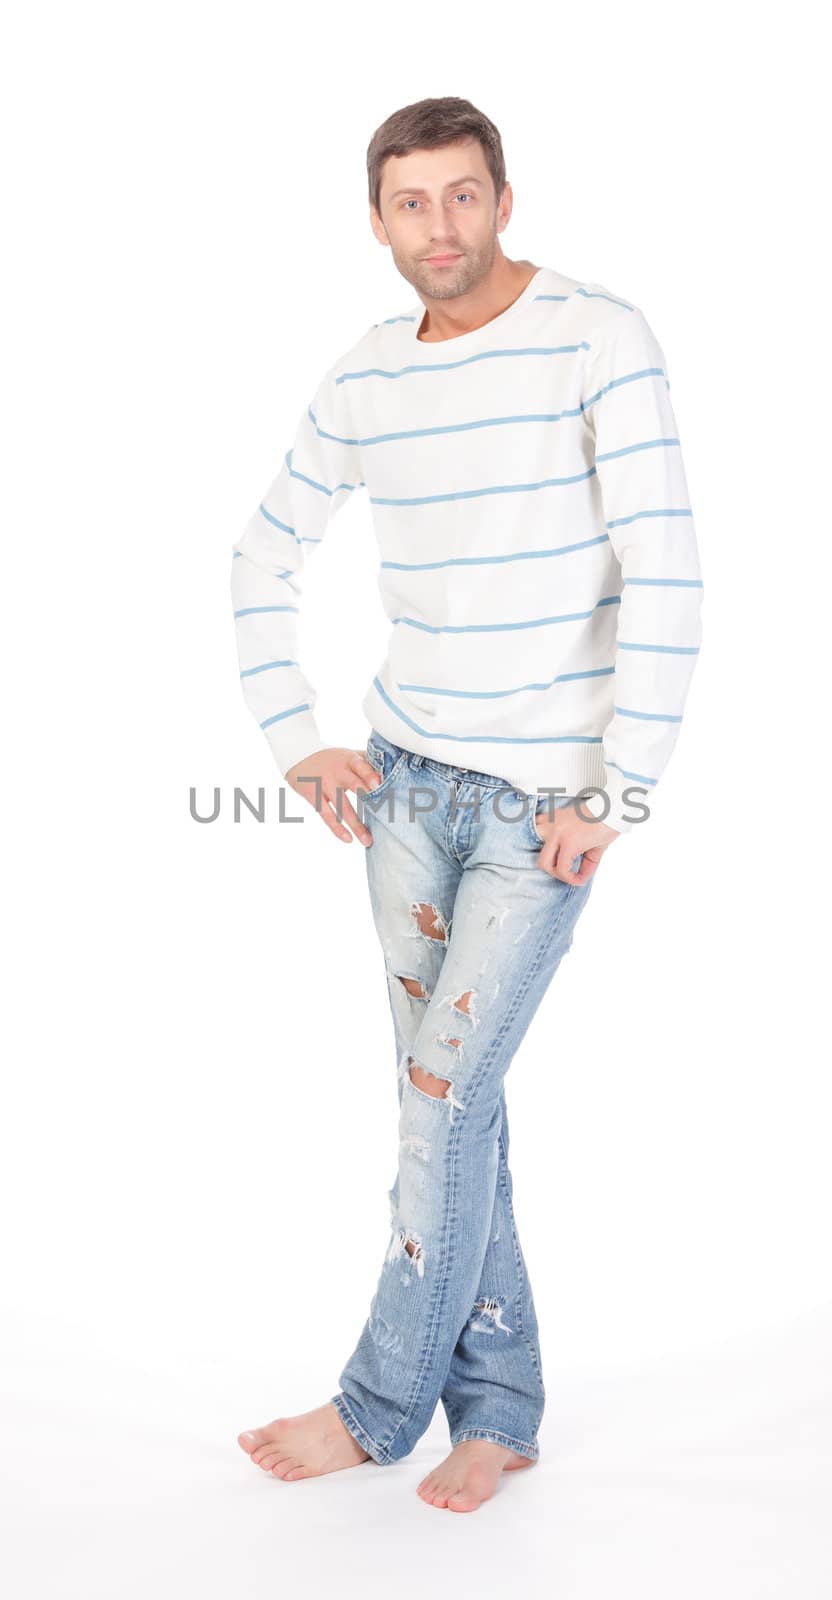 Handsome casual man standing barefoot in trendy ragged jeans with his hands in his pockets over a white background